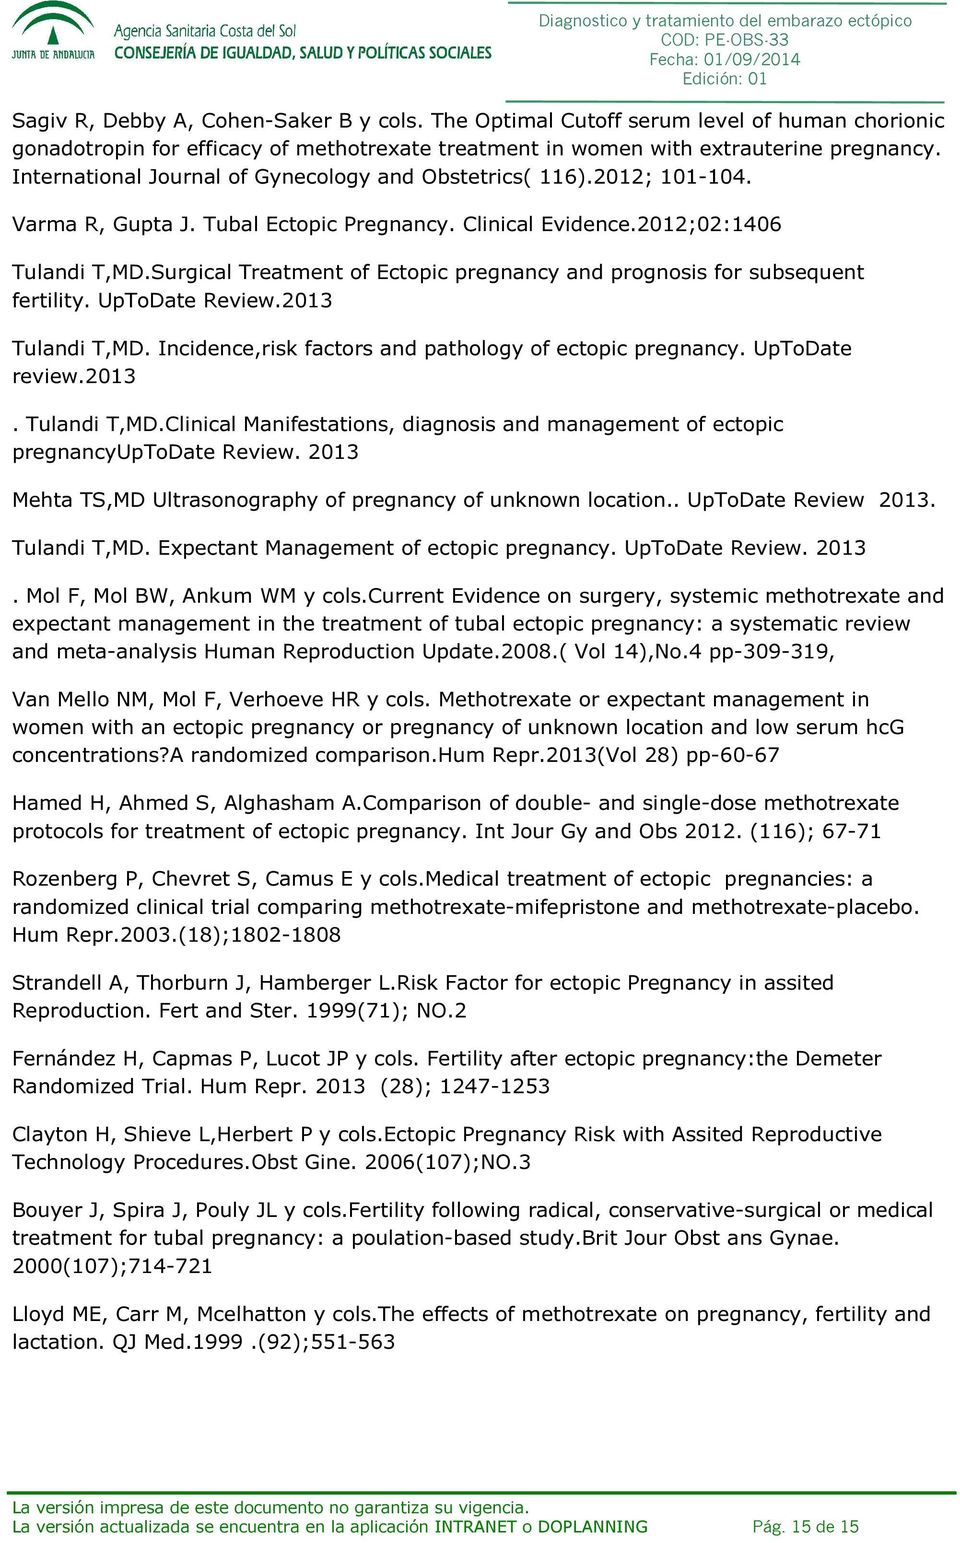 Surgical Treatment of Ectopic pregnancy and prognosis for subsequent fertility. UpToDate Review.2013 Tulandi T,MD. Incidence,risk factors and pathology of ectopic pregnancy. UpToDate review.2013. Tulandi T,MD.Clinical Manifestations, diagnosis and management of ectopic pregnancyuptodate Review.